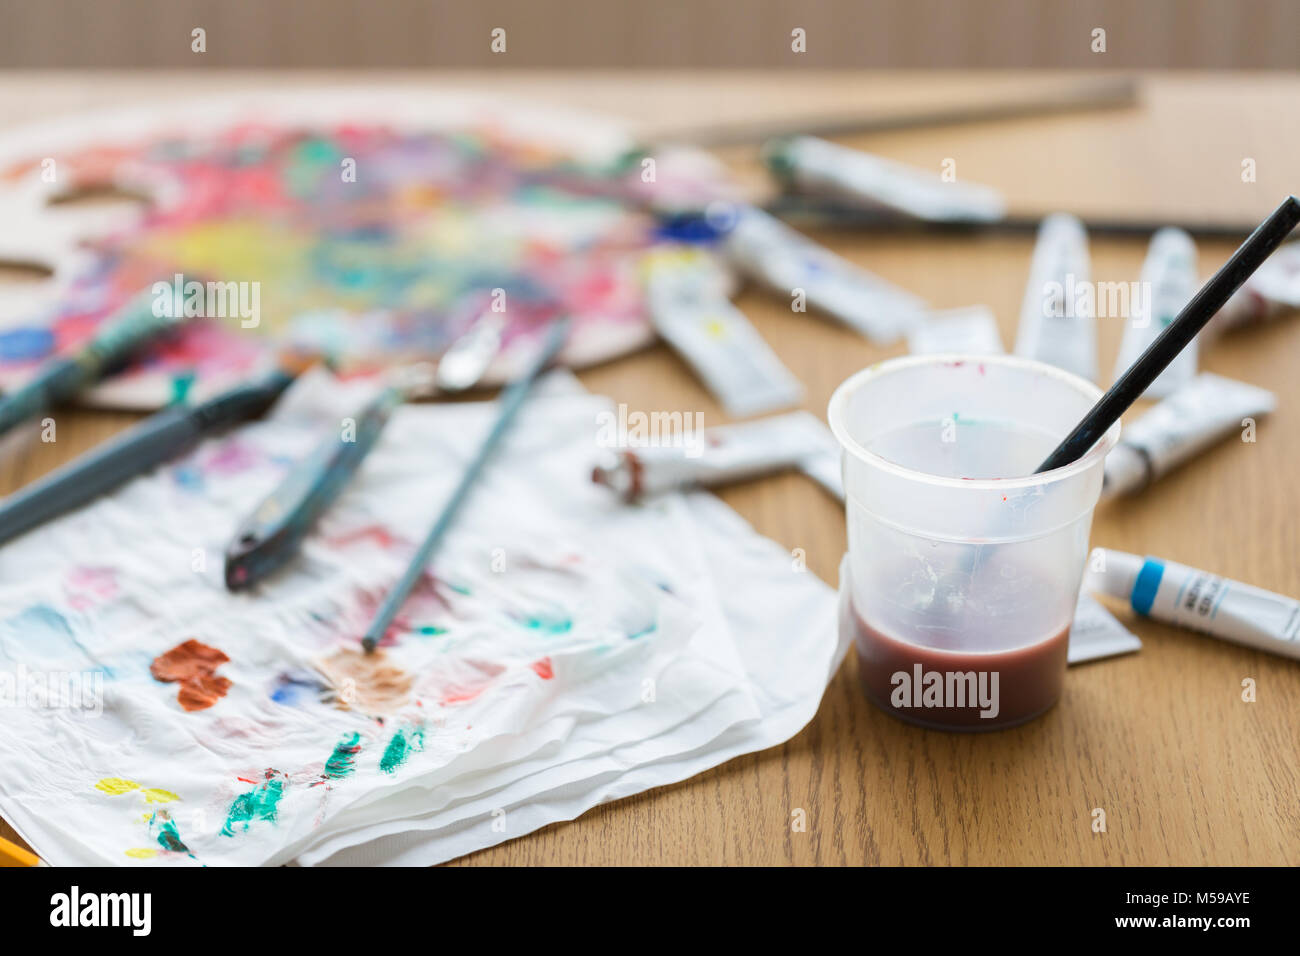 Artist Paint Brushes in White Bucket of Water, Acrylic Colour in Plastic  Cups Stock Photo - Image of brushes, concept: 155799260